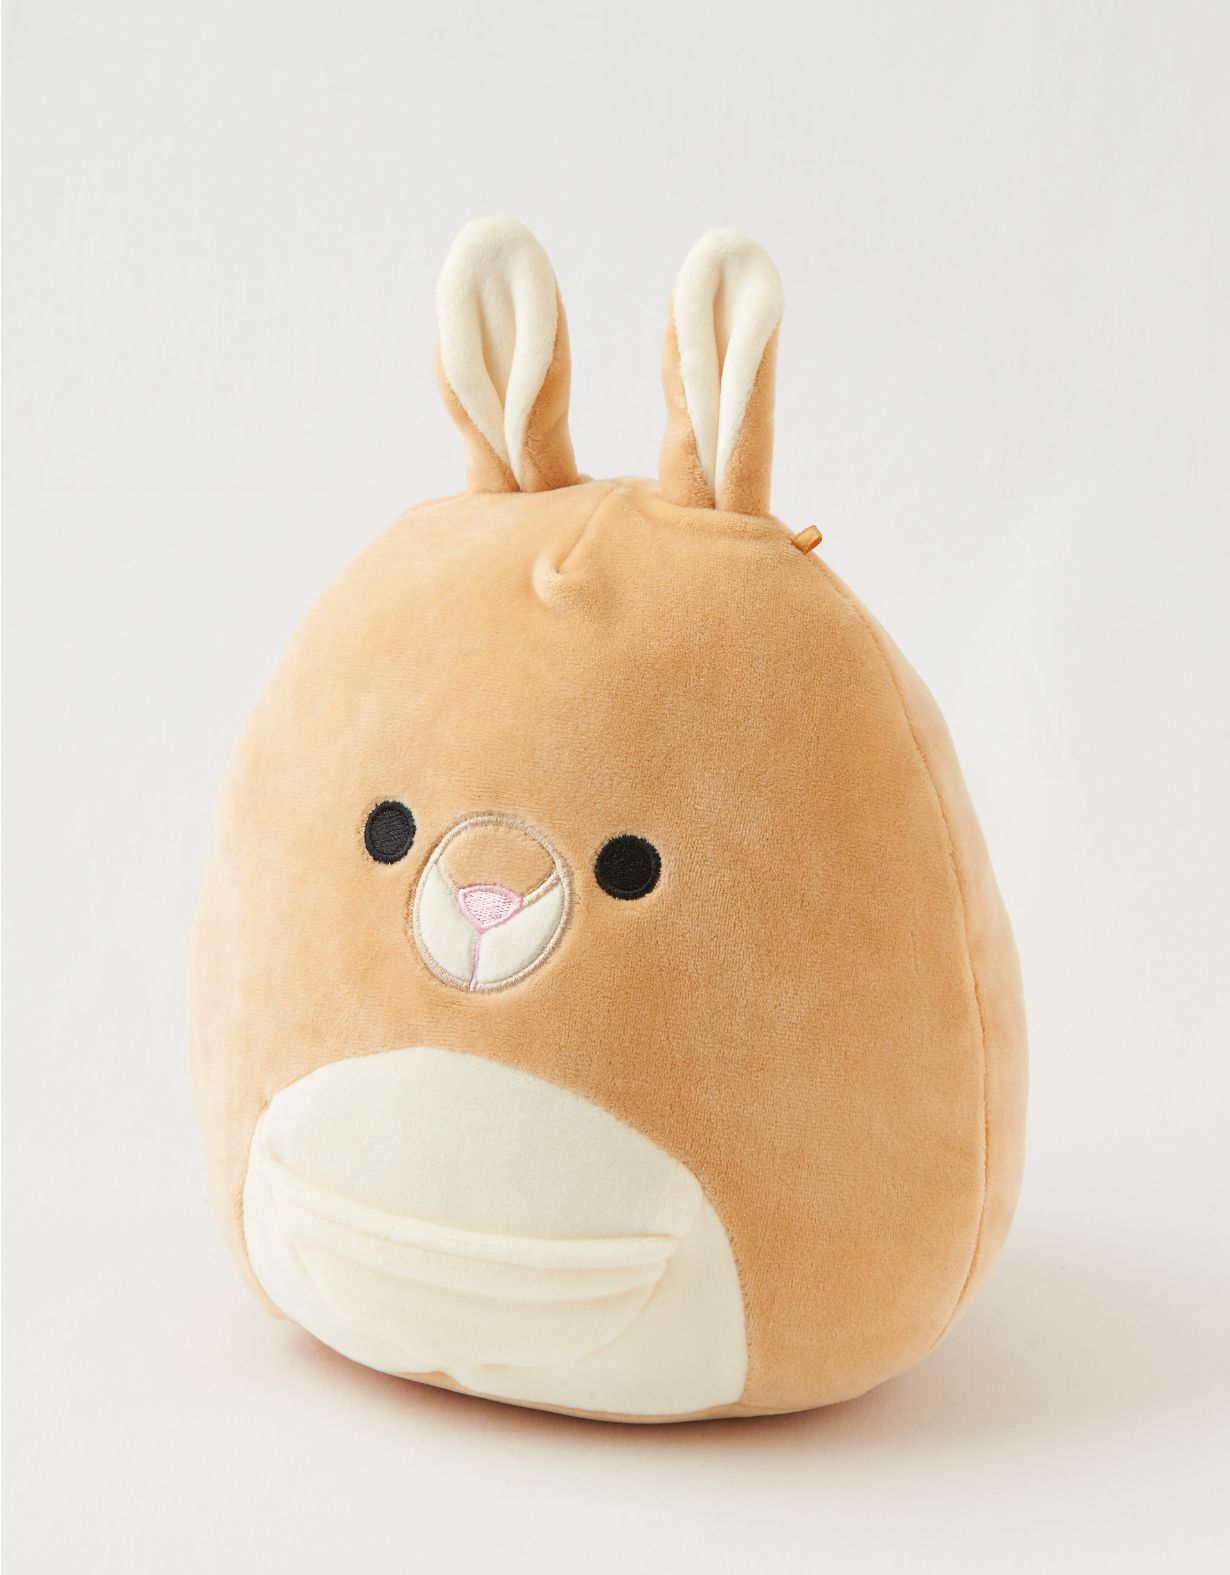 Squishmallow 16 in Plush Toy